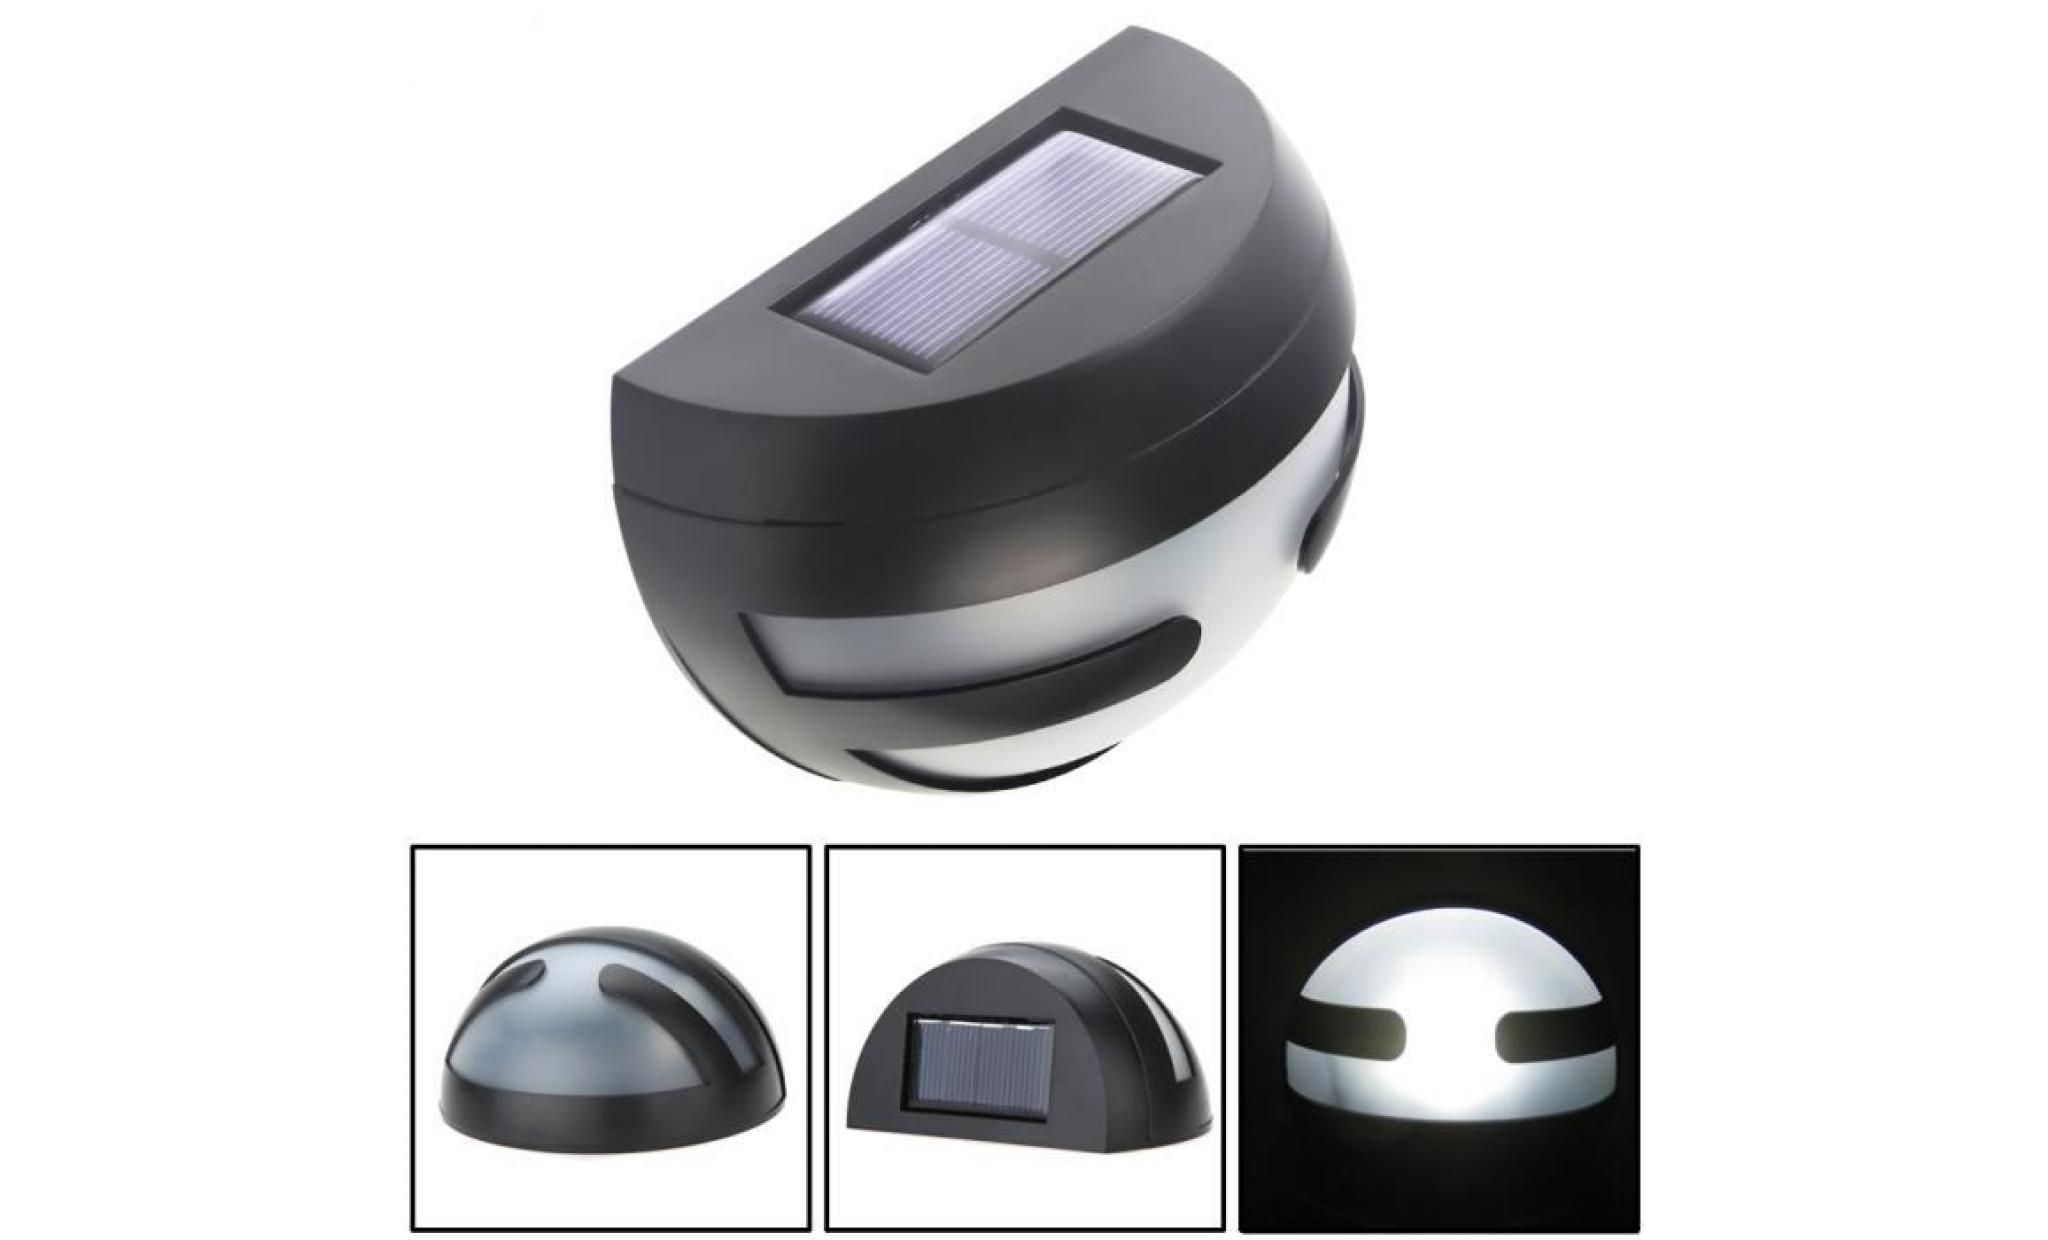 tld (2 led) lampe solaire lampe extérieure /lampe led /lampe eclairage semi cercle abs solaires ip44 blanc froid